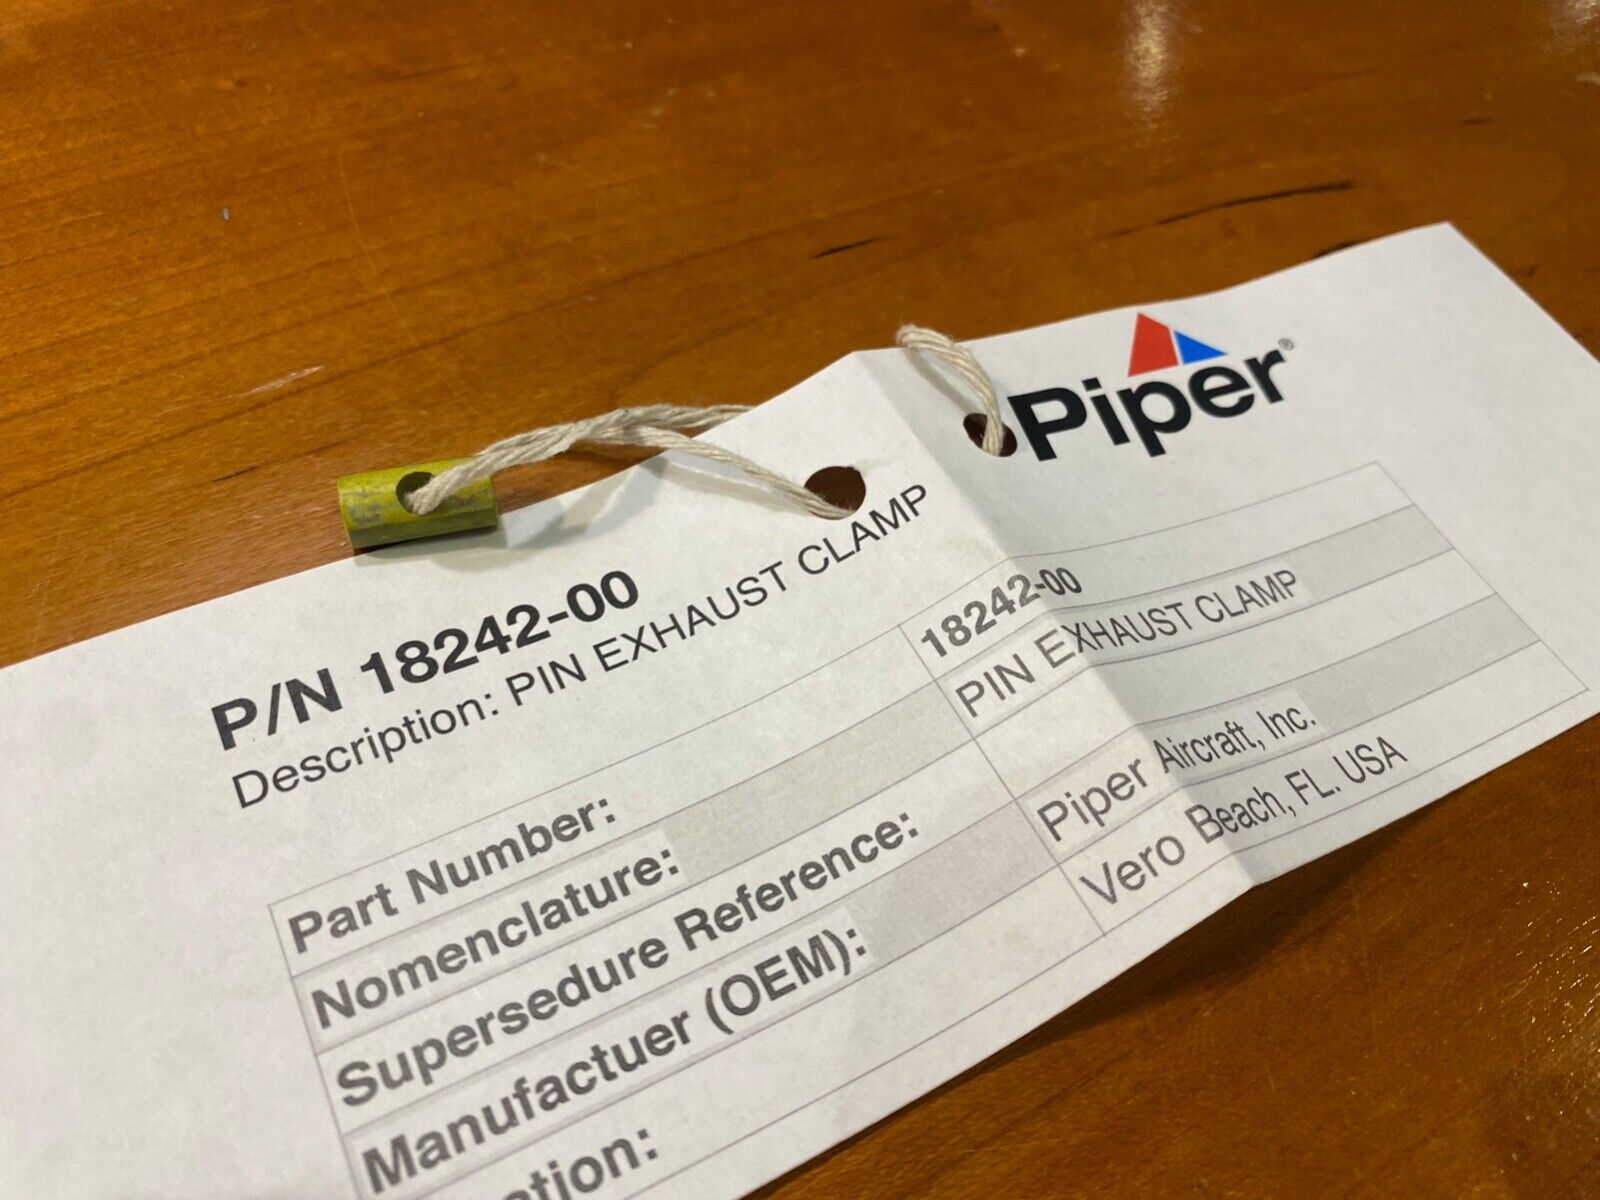 Brand New Genuine Piper Exhaust Clamp Pin, PN 18242-00 18242-000